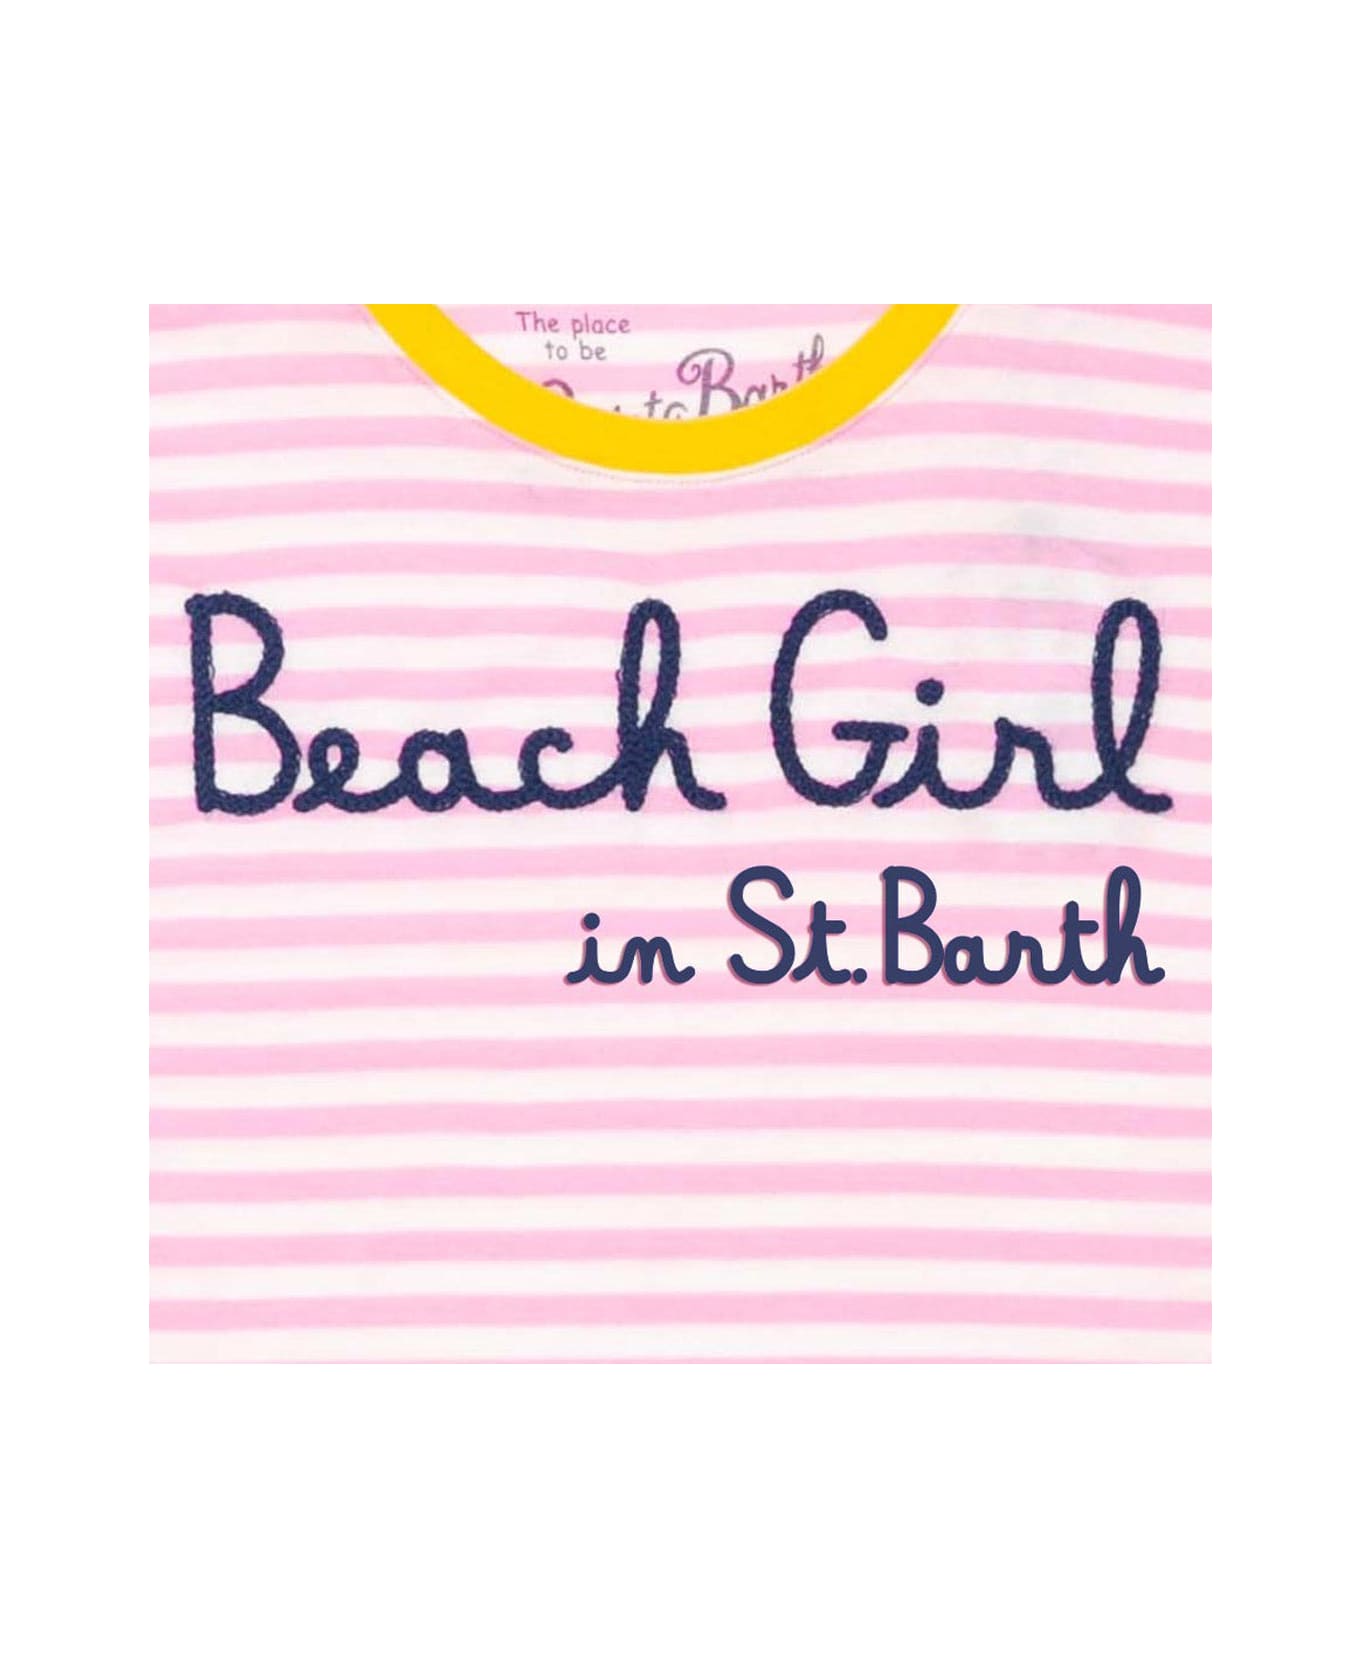 MC2 Saint Barth Pink Striped T-shirt With Embroidered Beach Girl - PINK